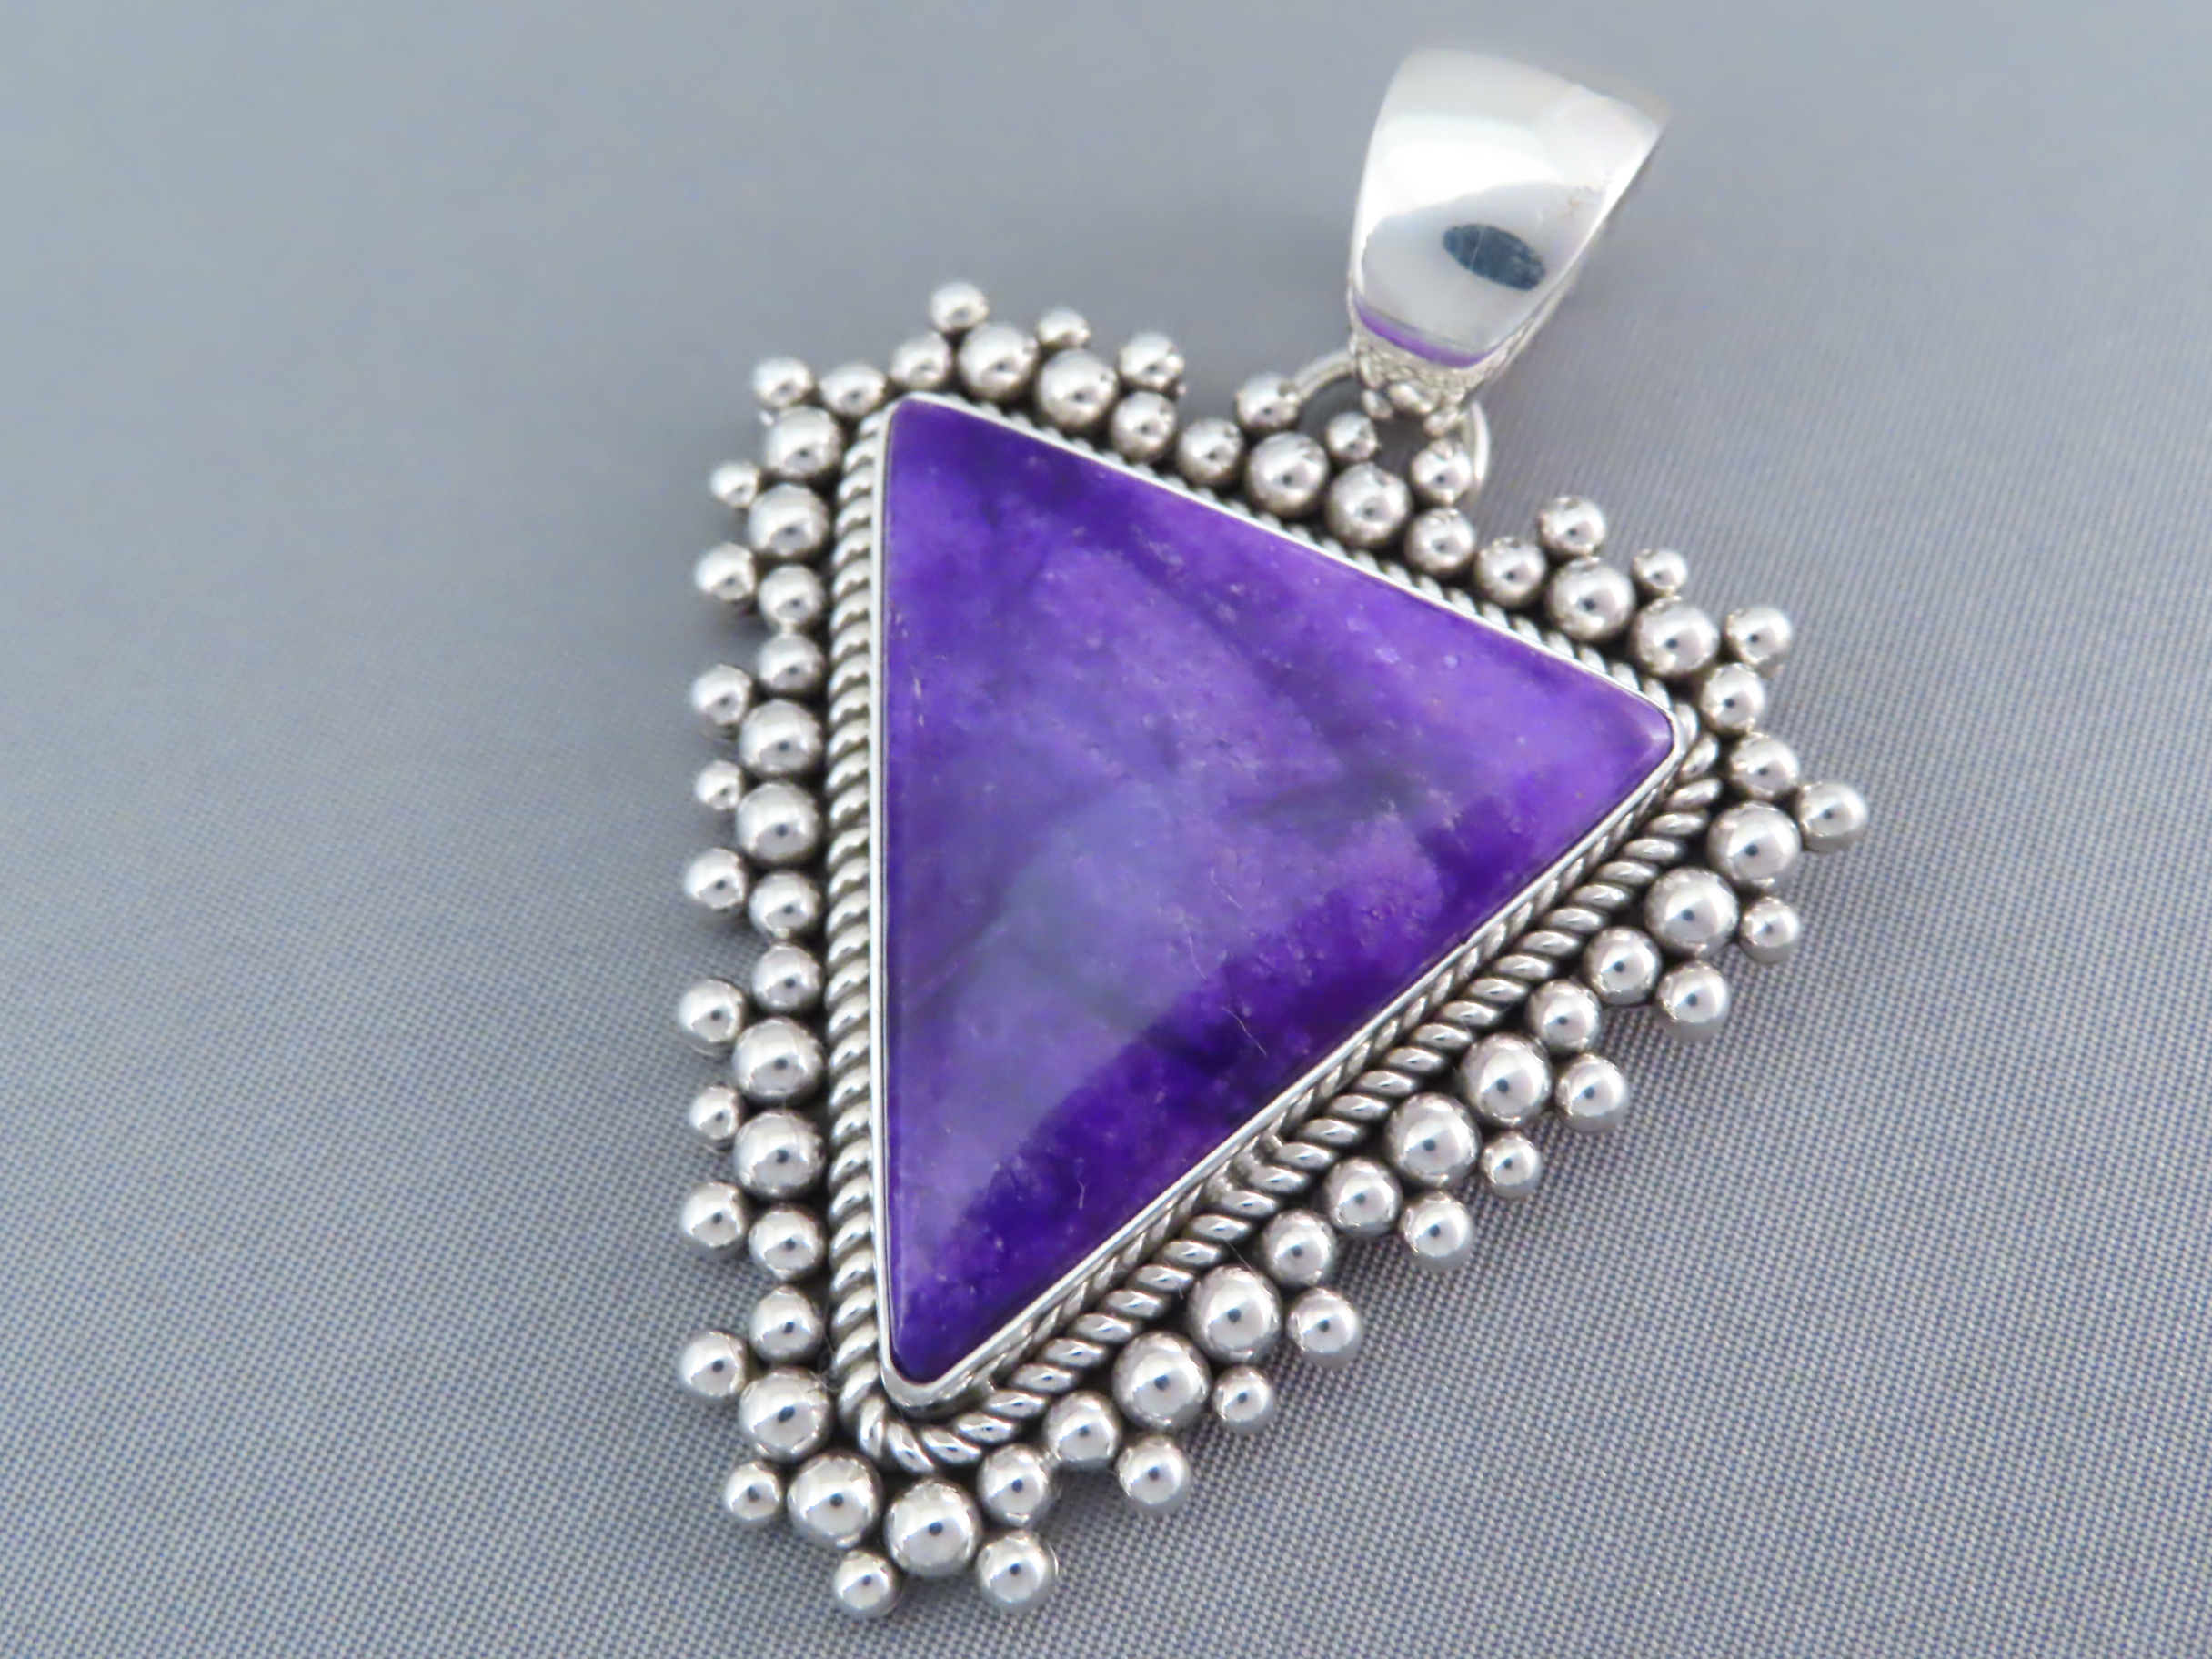 Larger Sugilite Pendant in Sterling Silver by Native American (Navajo) jewelry artist, Artie Yellowhorse $1,600- FOR SALE